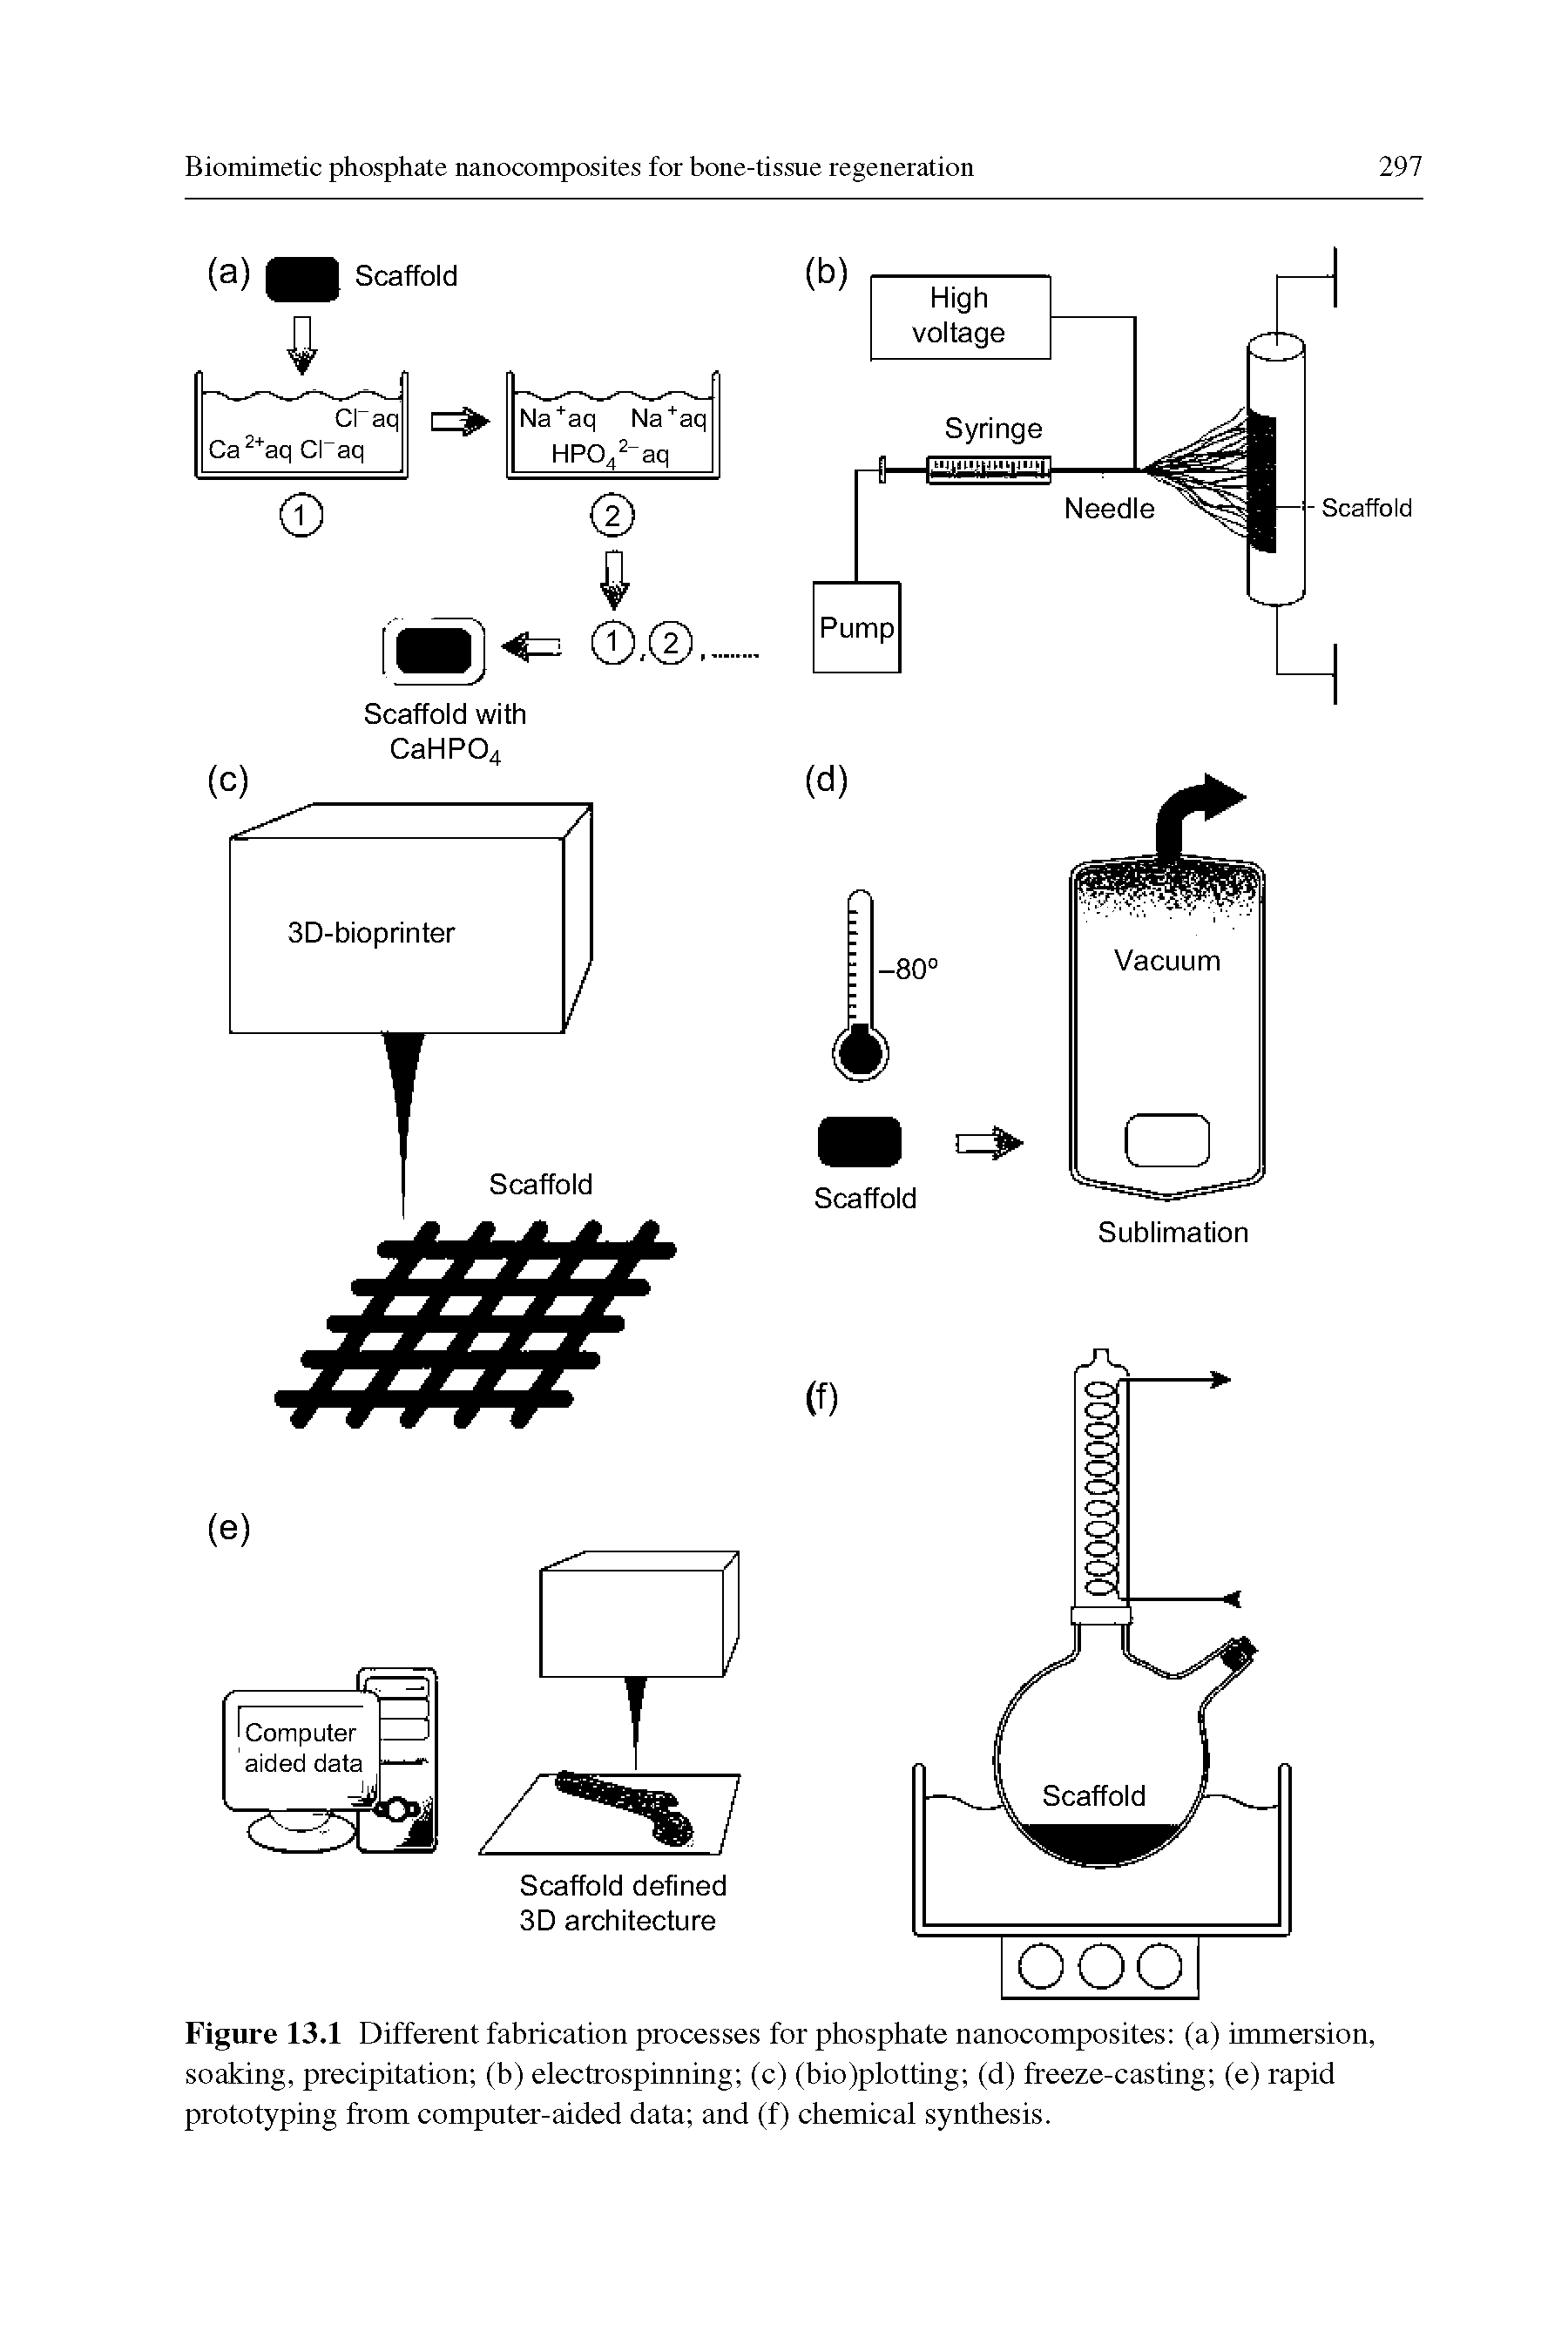 Figure 13.1 Different fabrication processes for phosphate nanocomposites (a) immersion, soaking, precipitation (b) electrospinning (c) (bio)plotting (d) freeze-casting (e) rapid prototyping from computer-aided data and (f) chemical synthesis.